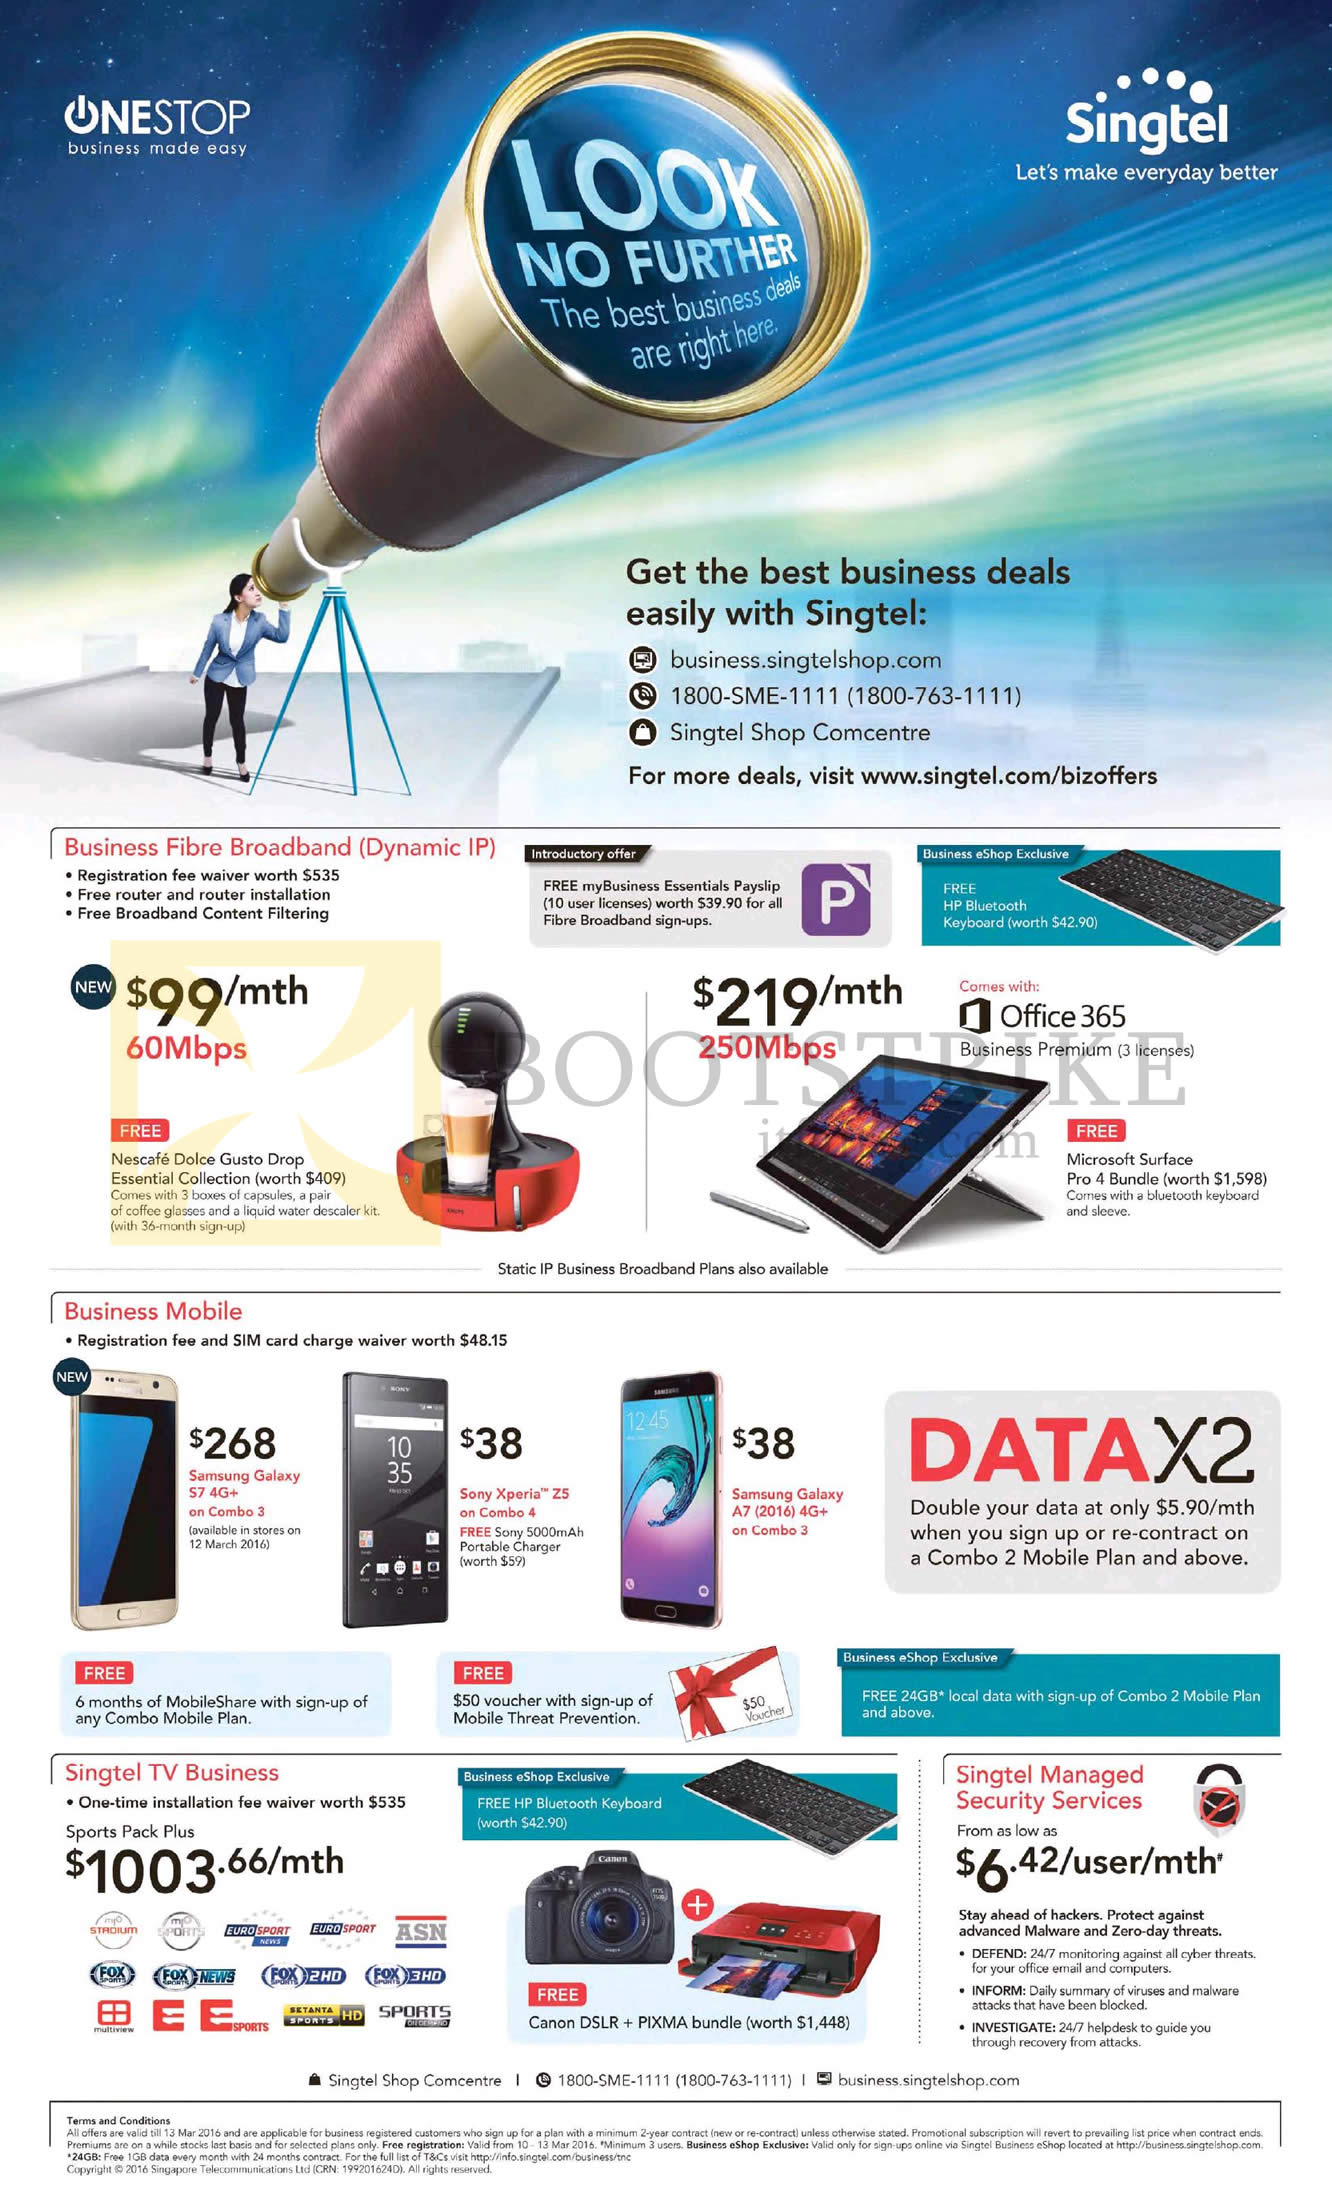 IT SHOW 2016 price list image brochure of Singtel Business Fibre Broadband, Mobile, TV 99.00 60Mbps, 219.00 250Mbps, Samsung Galaxy S7, A7, Sony Xperia Z5, 1003.66 Sports Pack Plus